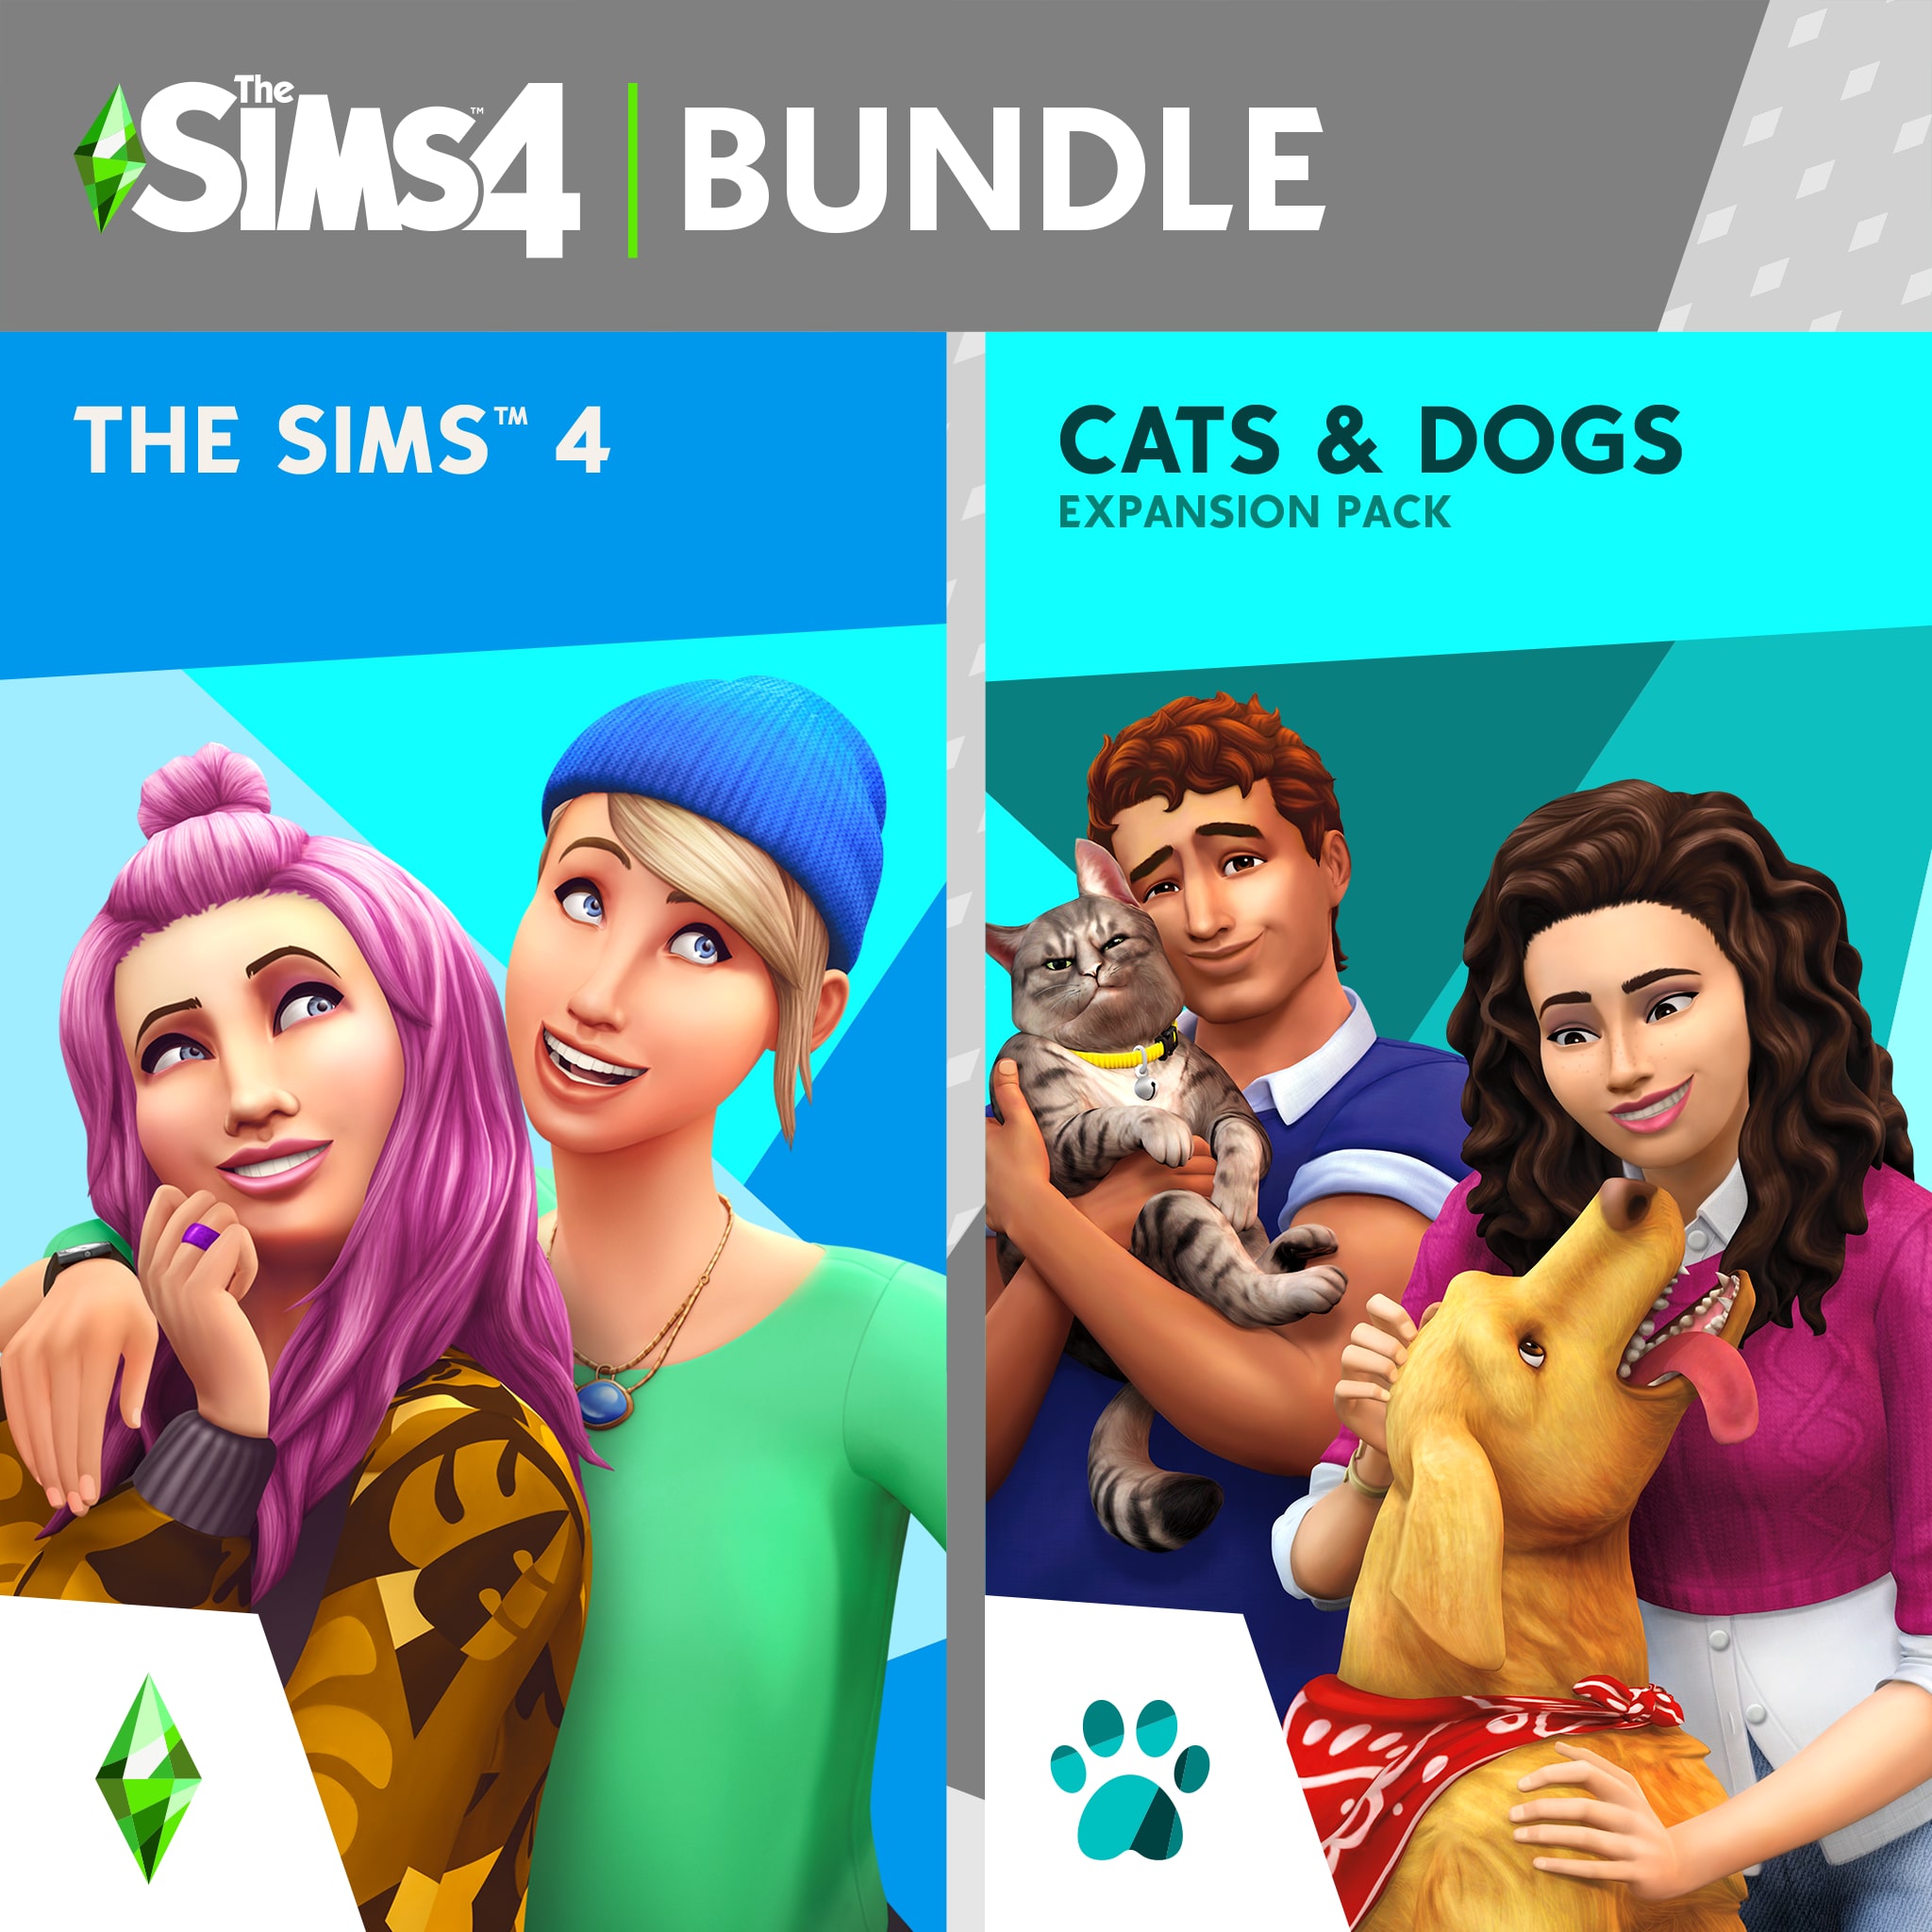 sims for playstation 4